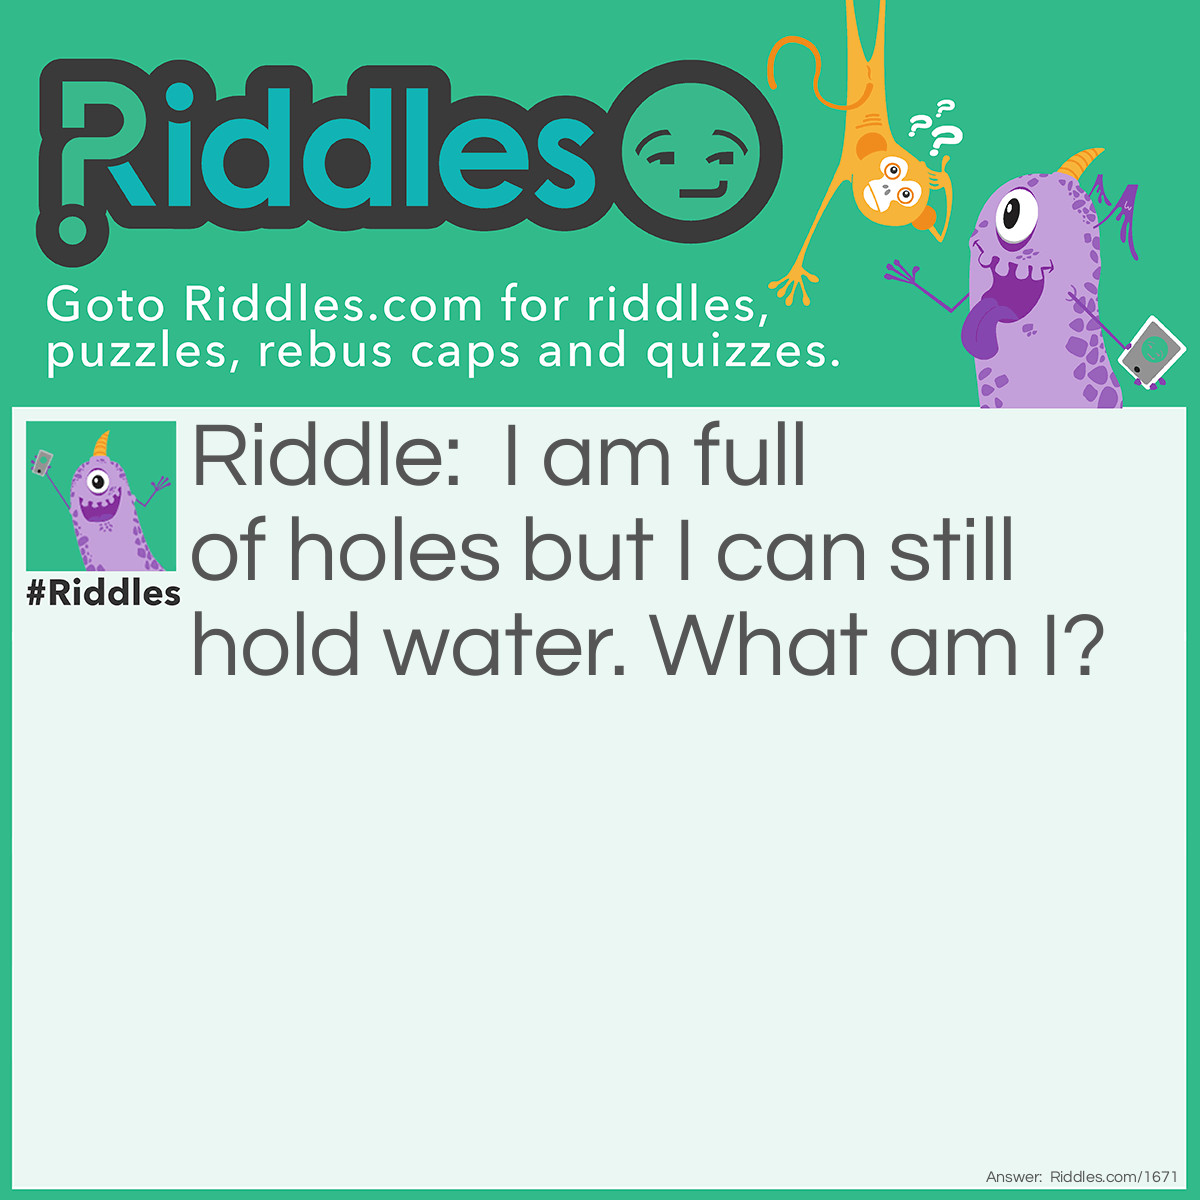 Riddle: I am full of holes but I can still hold water. What am I? Answer: A sponge!